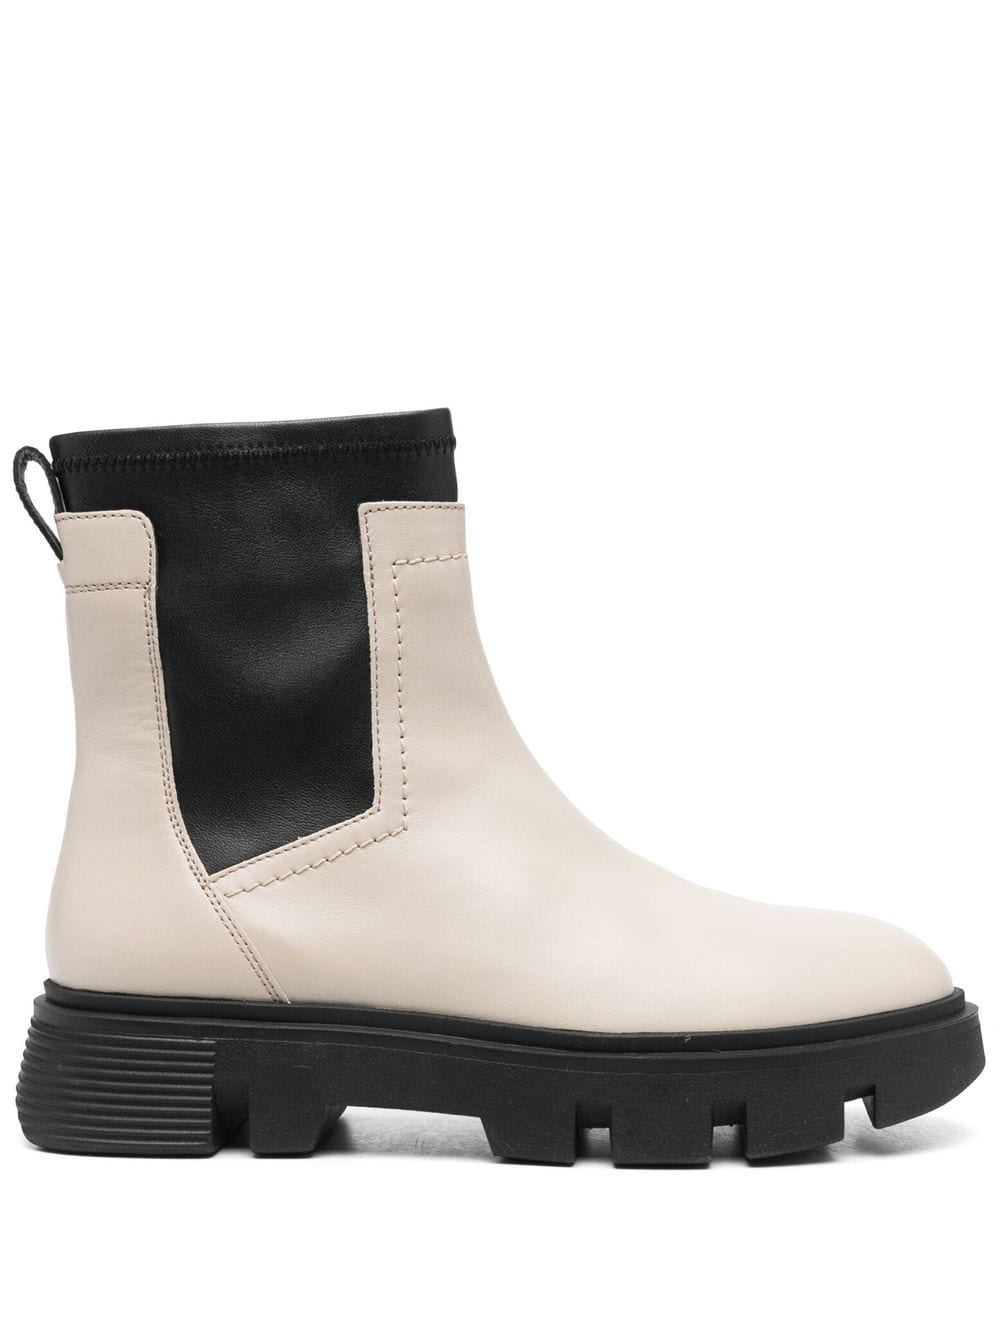 Geox Vilde Ankle Boots -